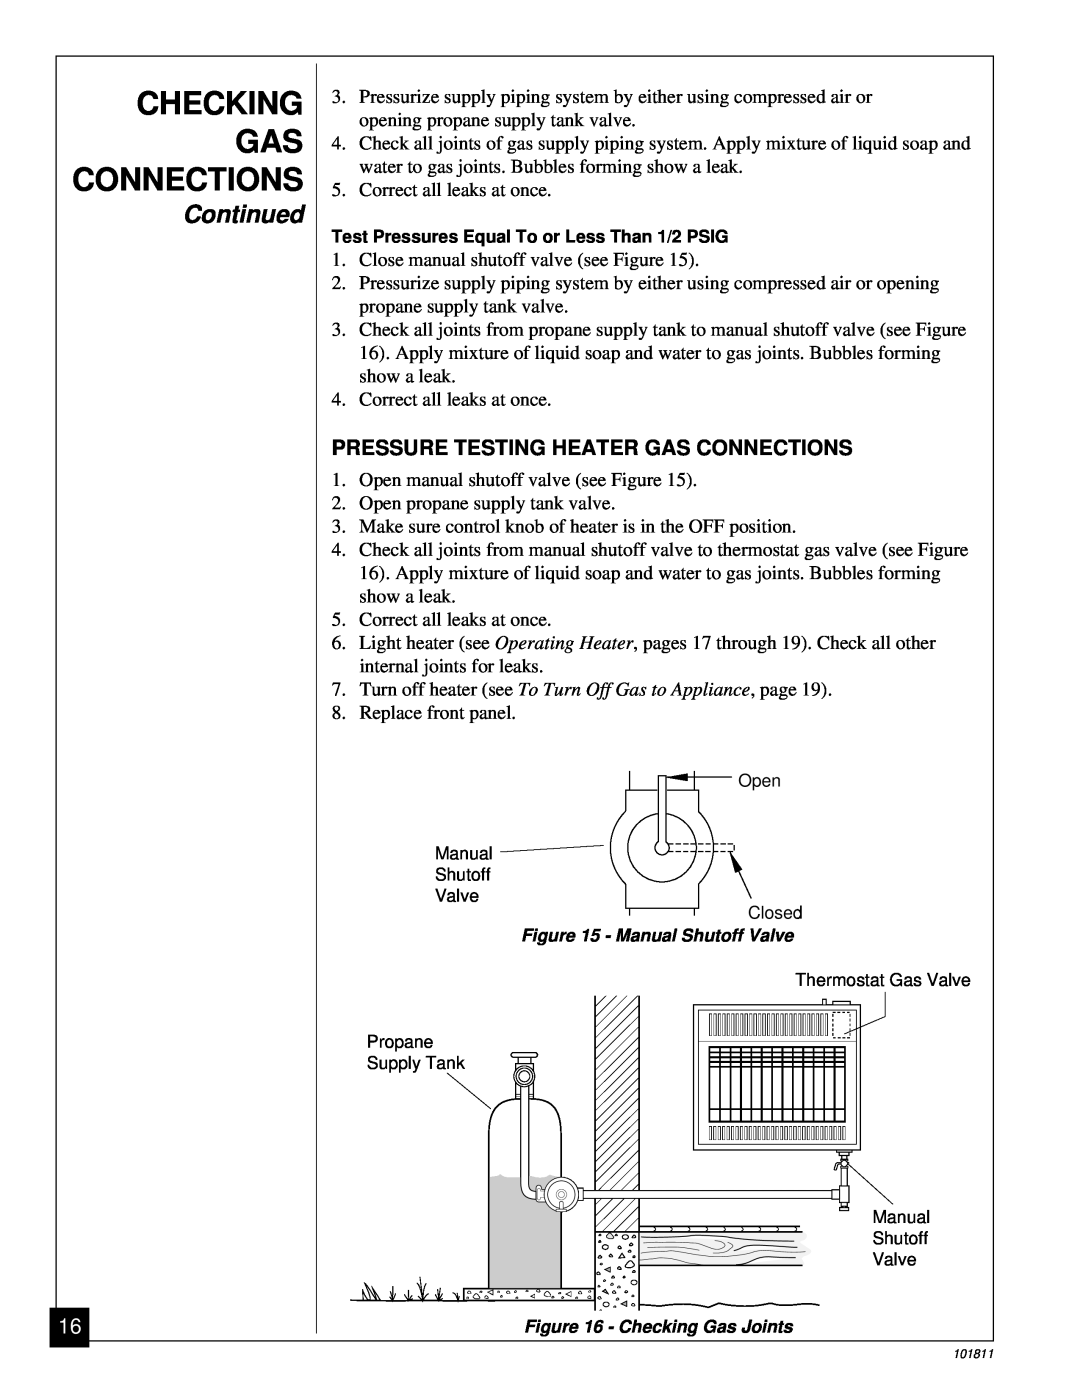 Desa 101811-01C.pdf installation manual Checking Gas Connections, Continued, Pressure Testing Heater Gas Connections 